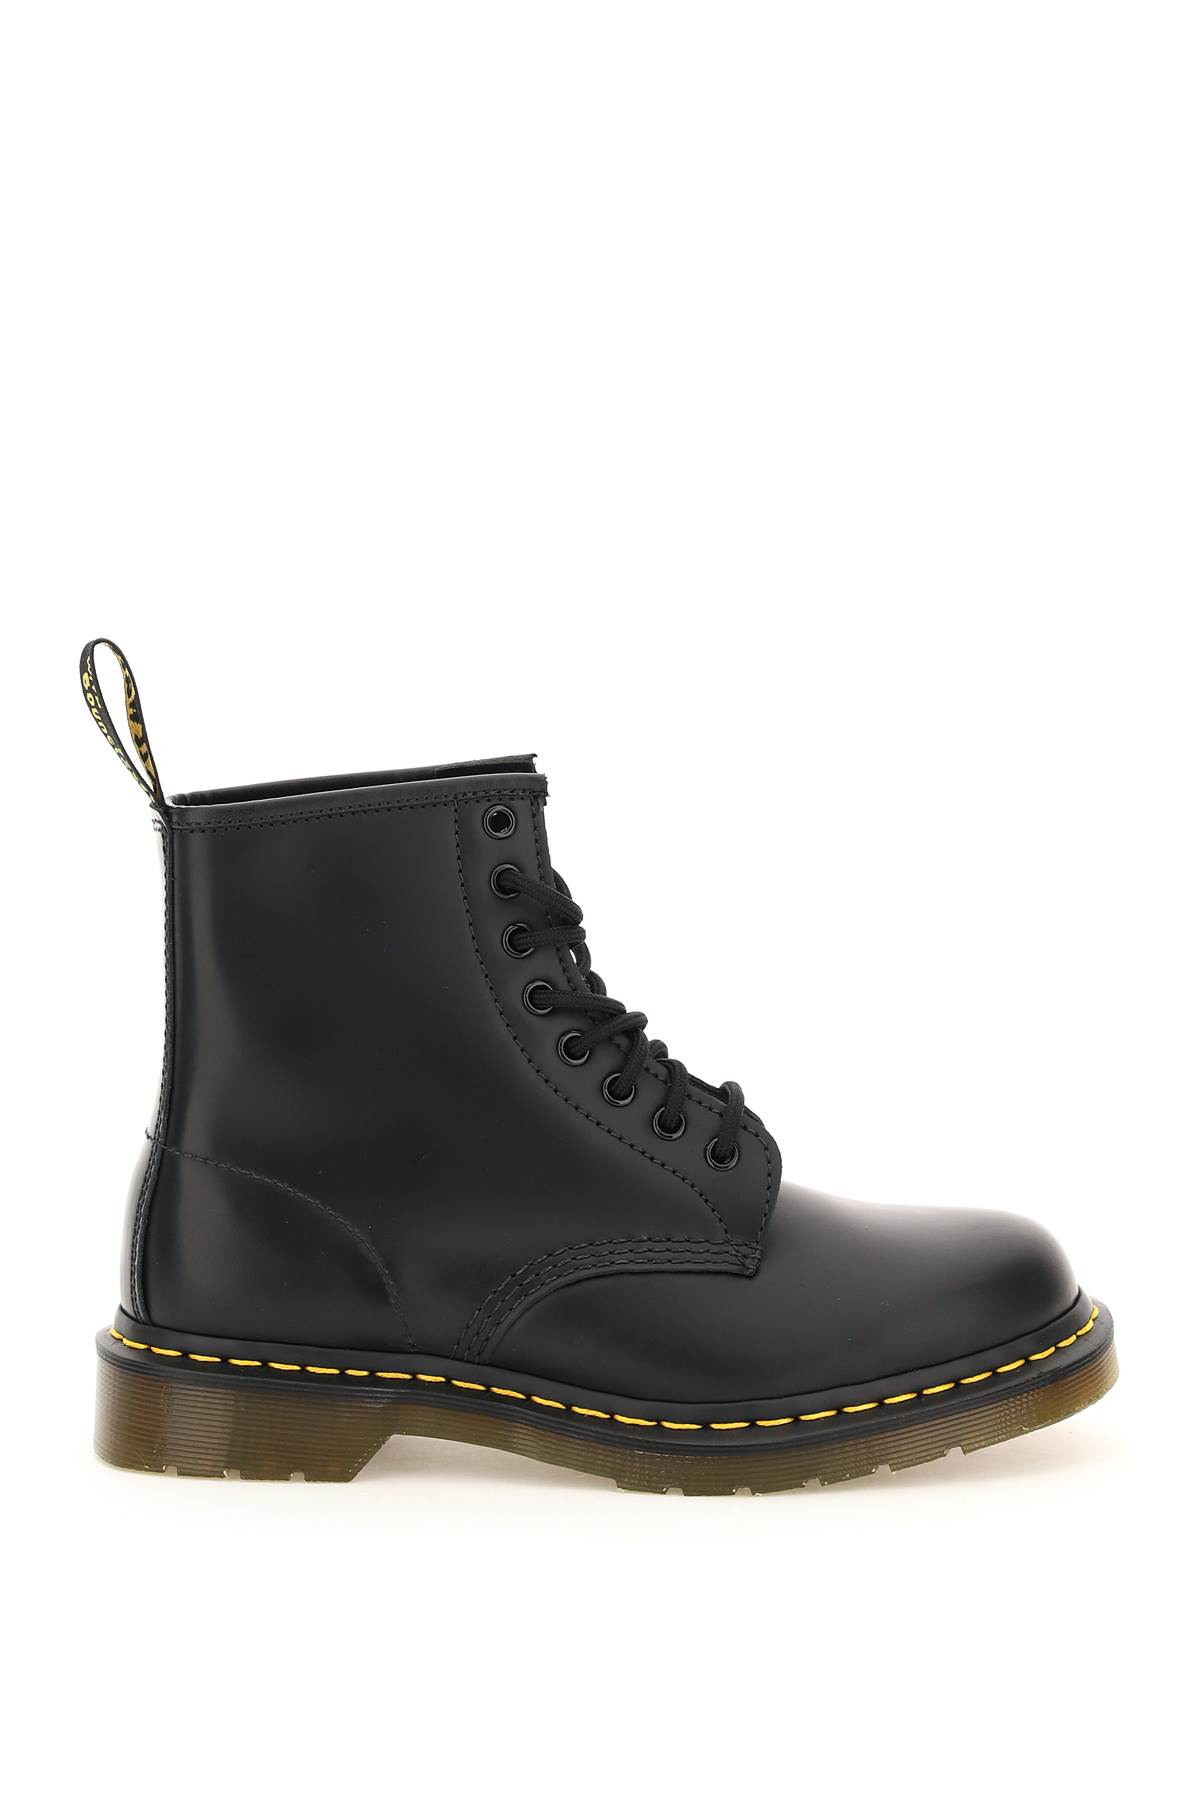 Dr. Martens 1460 Smooth Lace-up Combat Boots